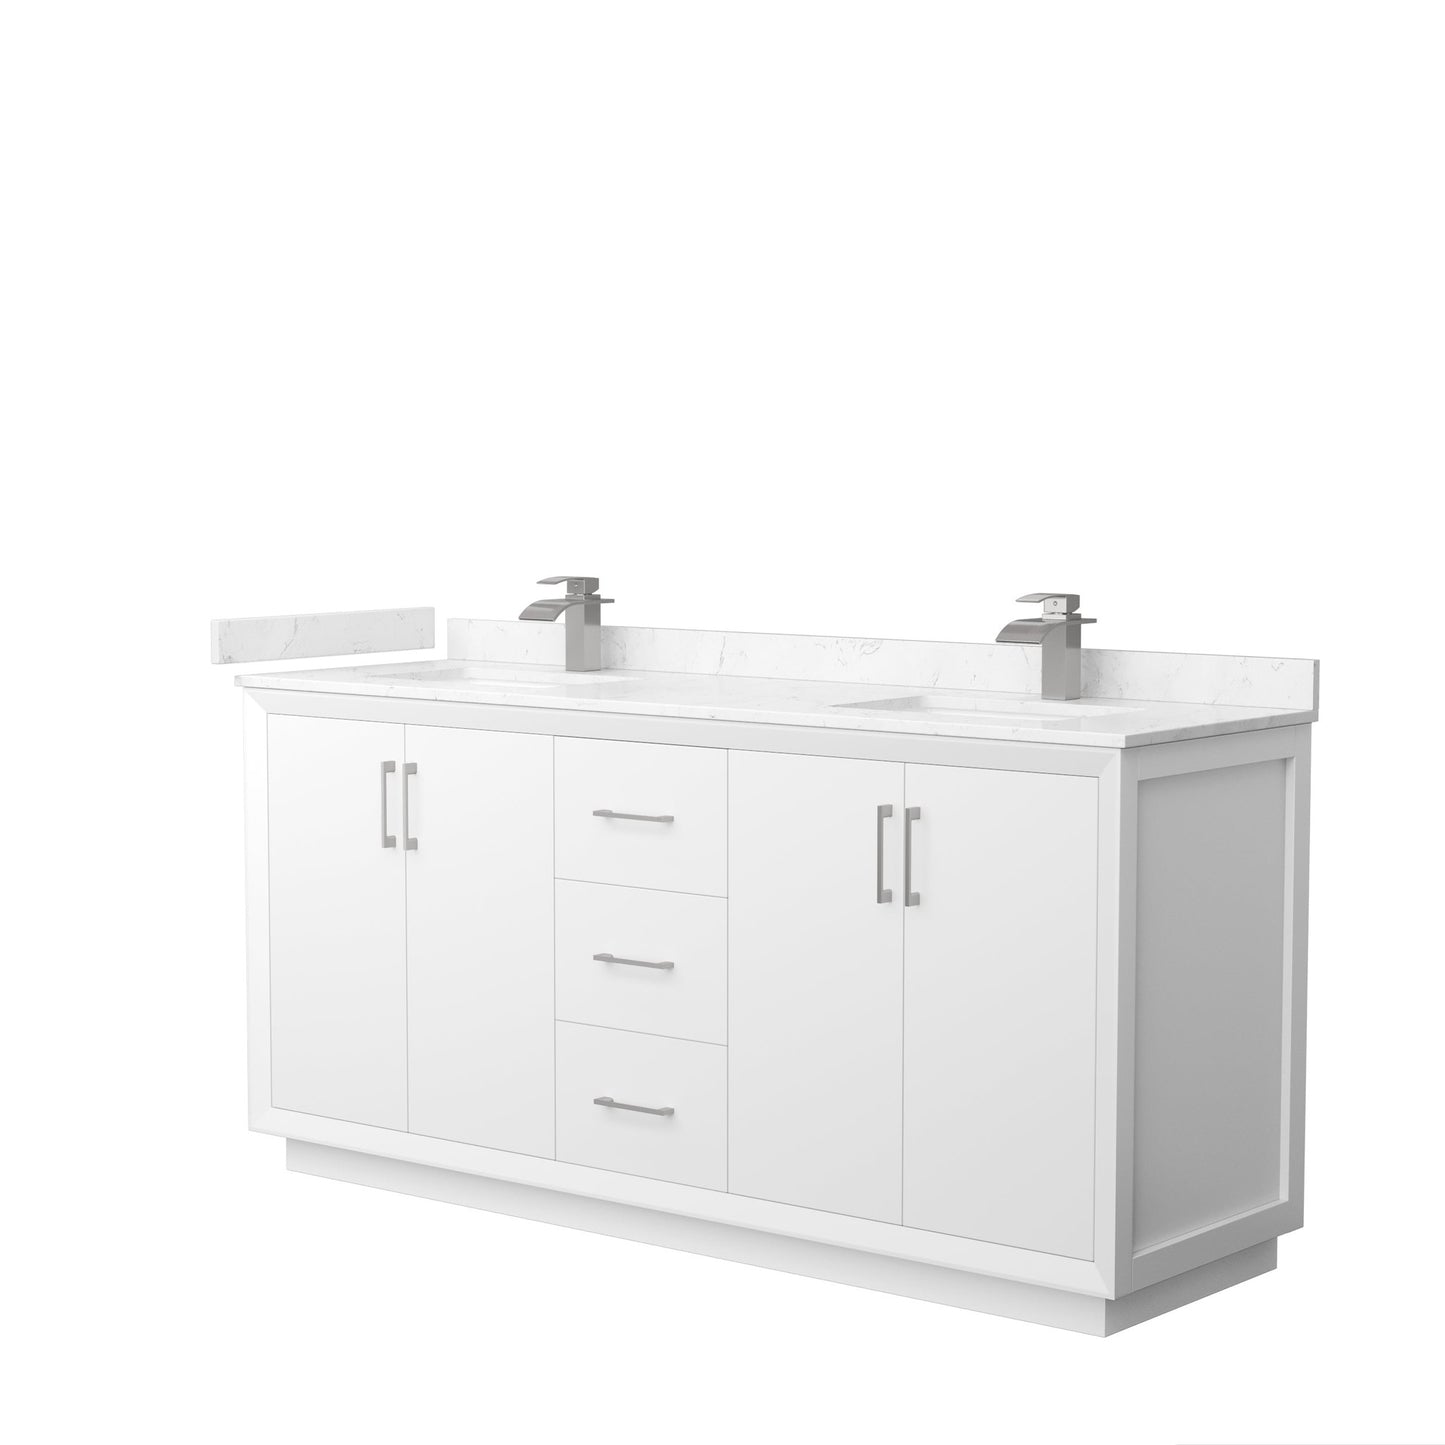 Wyndham Collection Strada 72" Double Bathroom Vanity in White, Carrara Cultured Marble Countertop, Undermount Square Sink, Brushed Nickel Trim